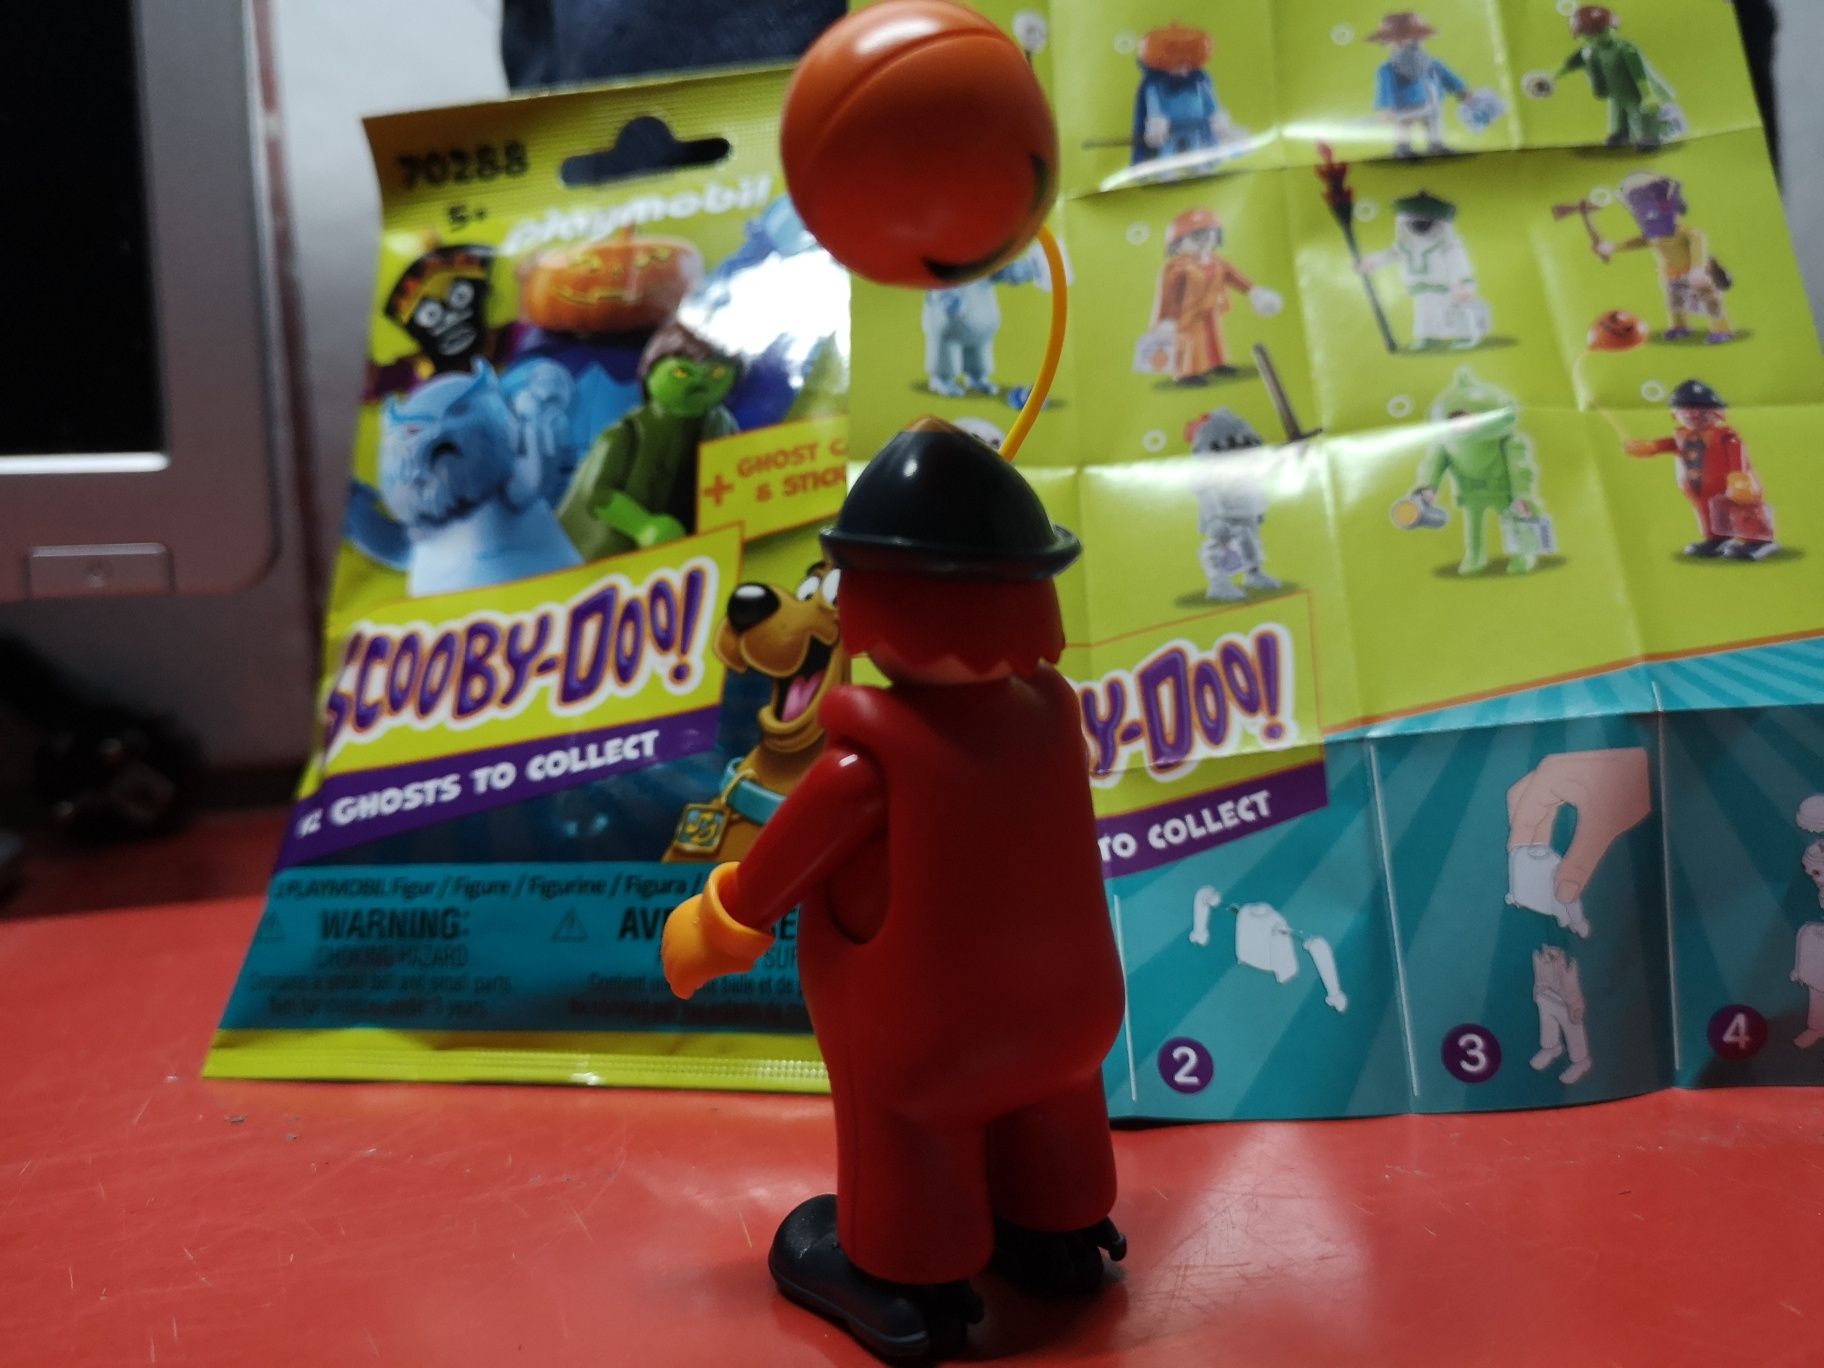 Playmobil Scooby Doo IT Ghosts to collect series 1 Fantome seria 1